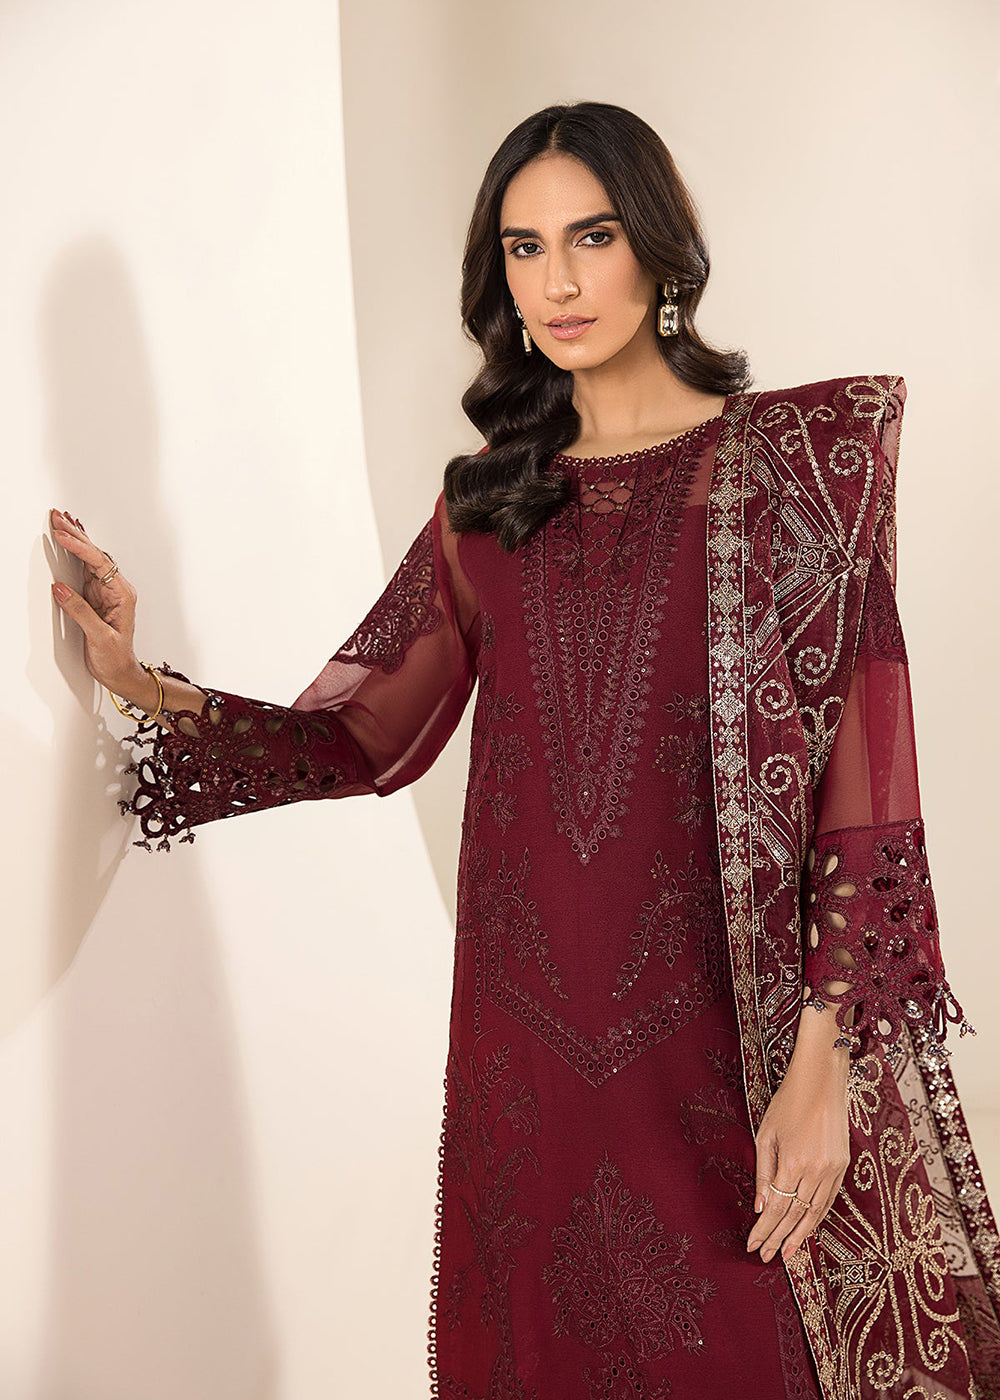 Buy Now Maroon Formal Suit - Alizeh - Lamhay Formals '23 - V15D01 - Raisa Online in USA, UK, Canada & Worldwide at Empress Clothing. 